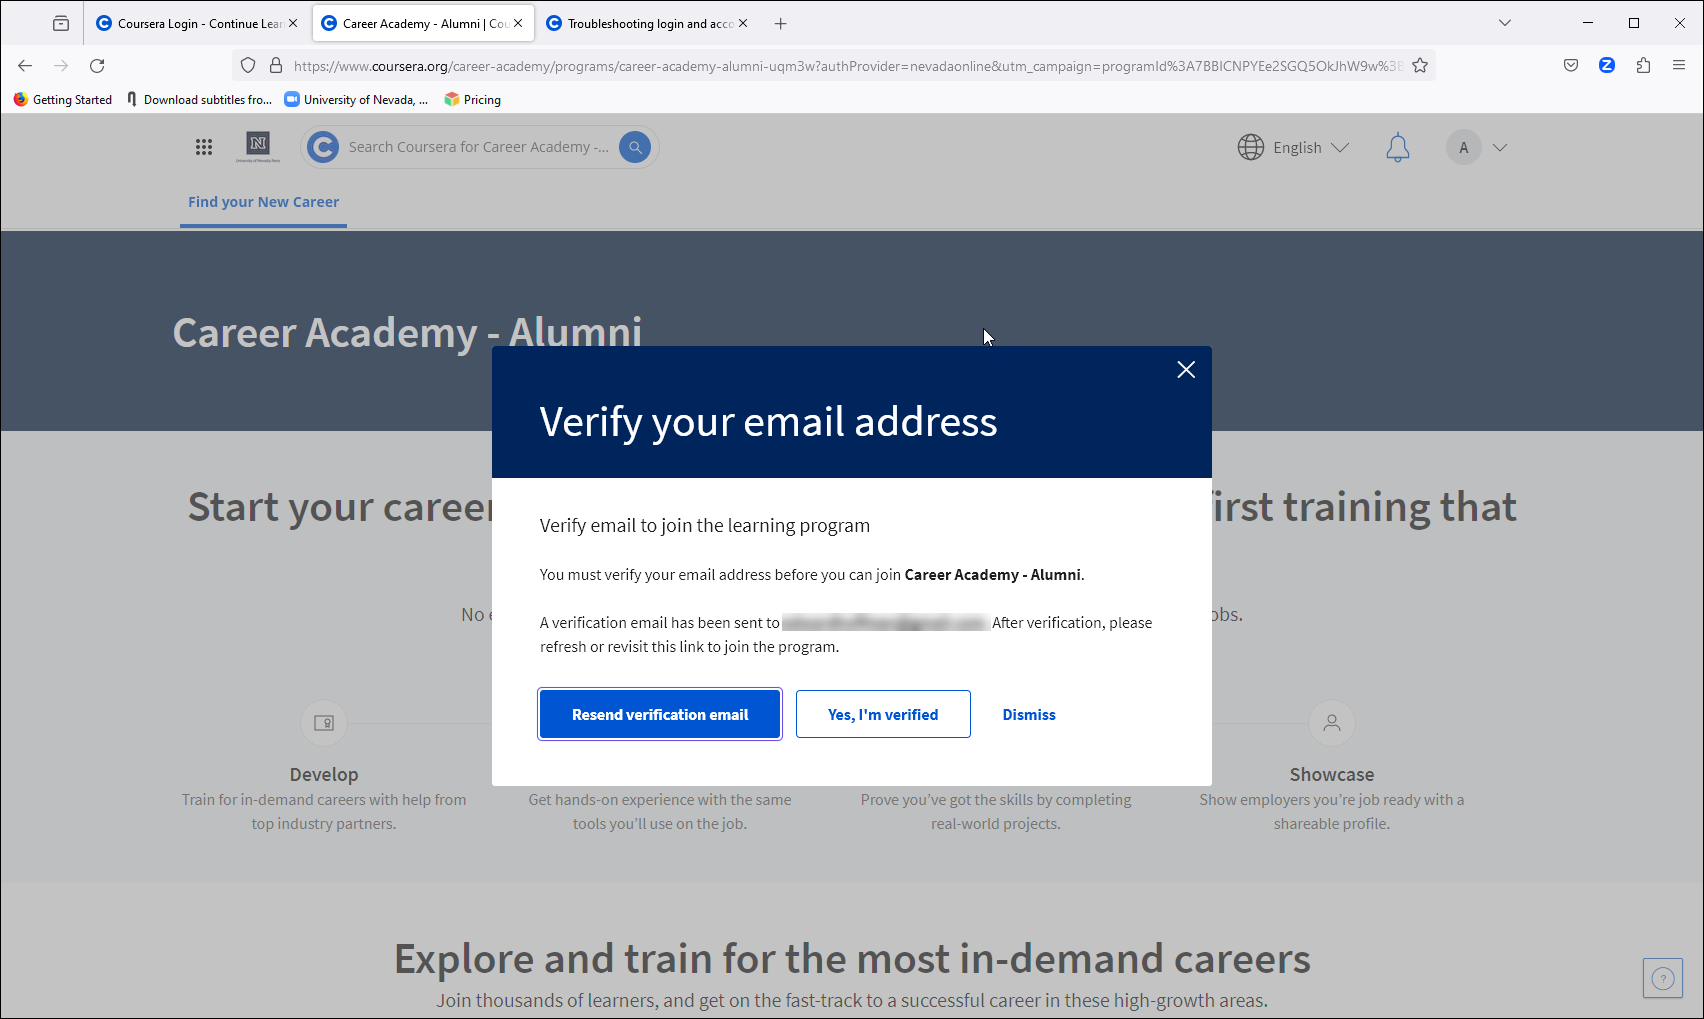 Screen shot of the UNR Coursera interface showing “Verify your email address” pop-up.